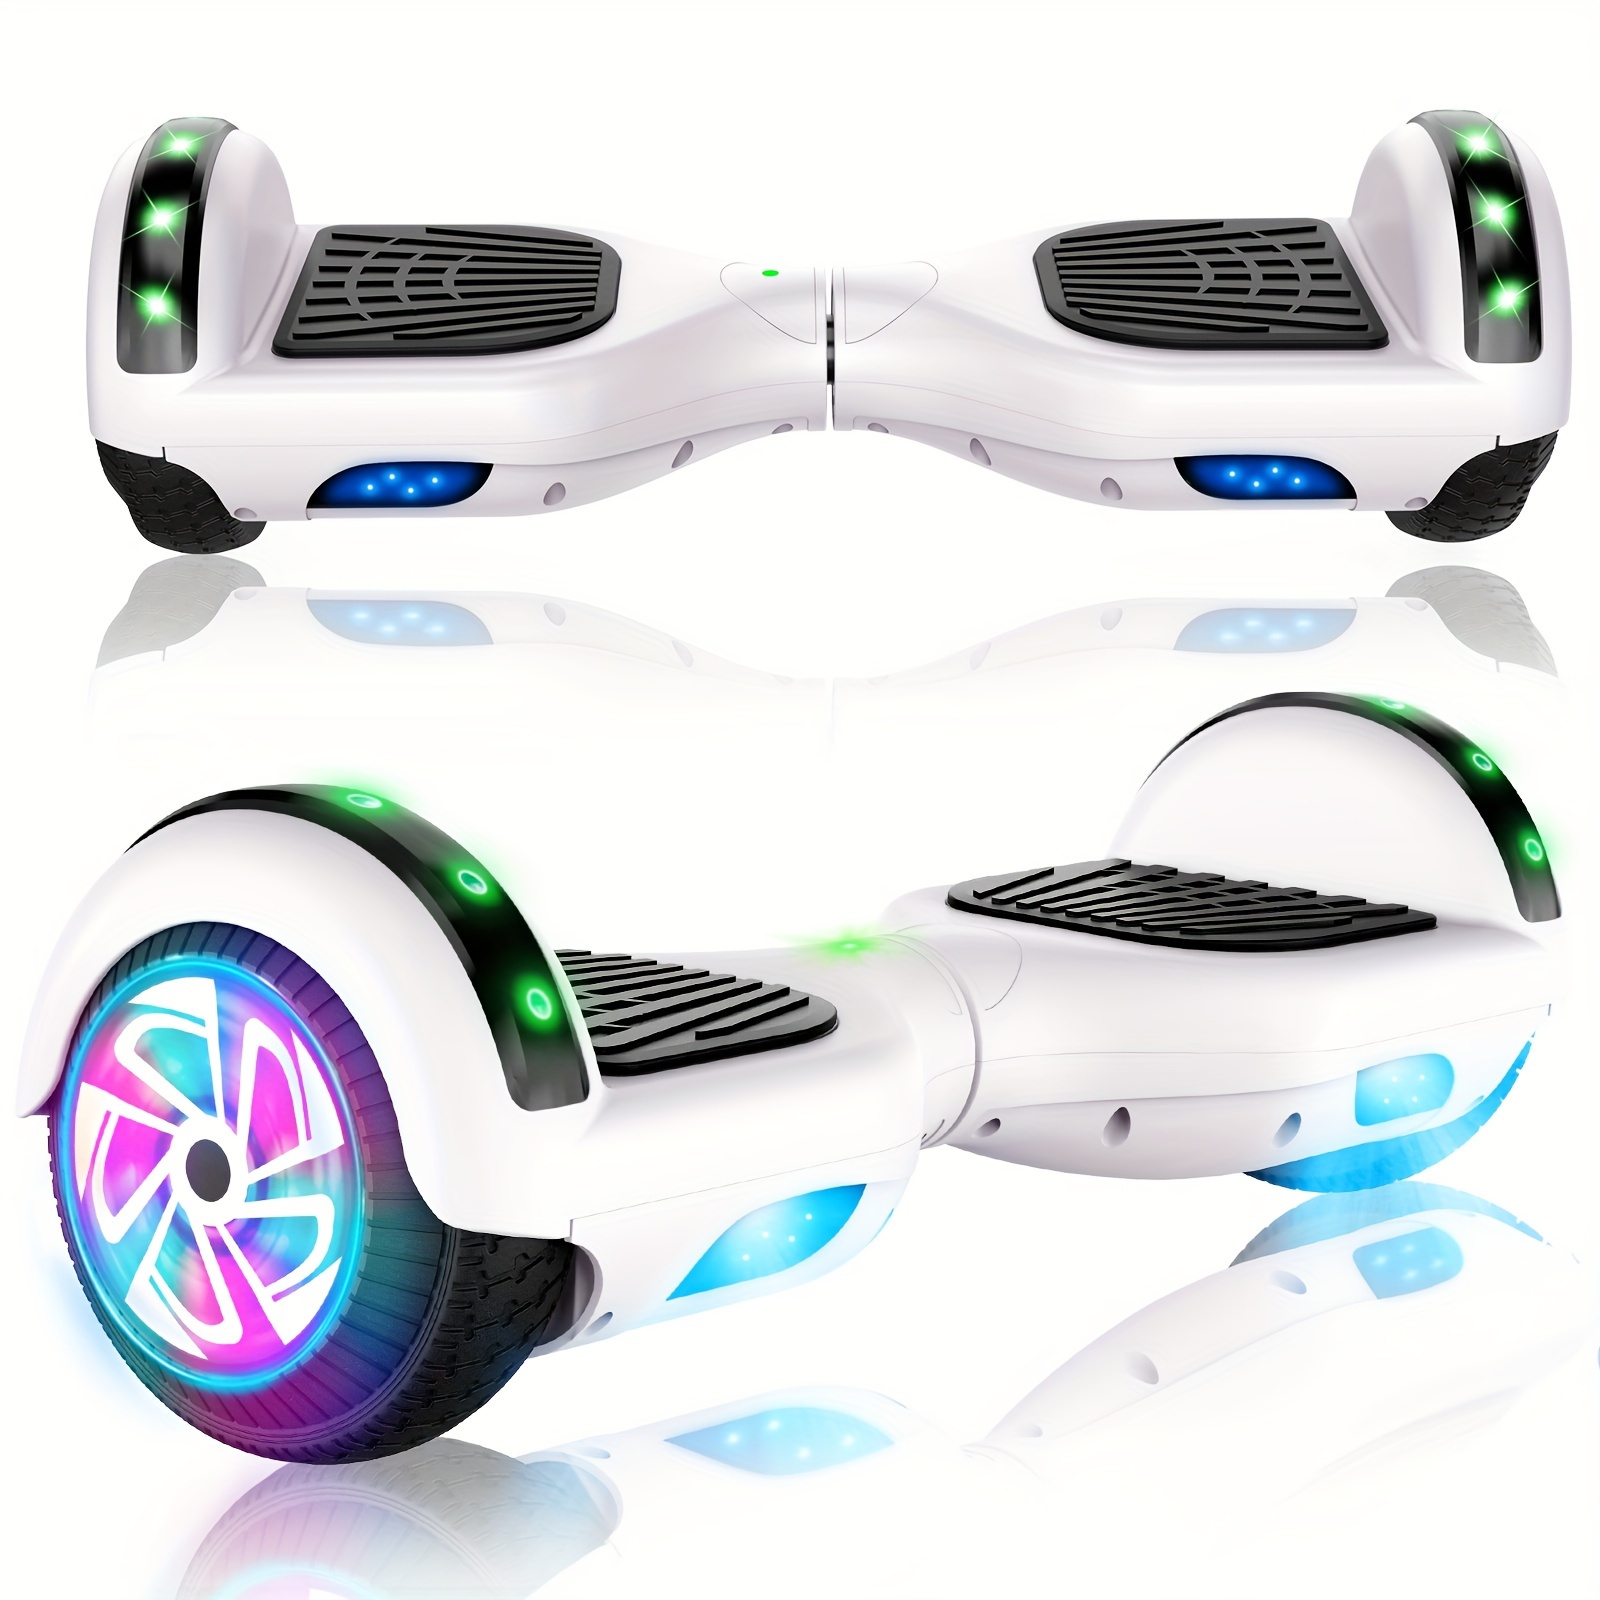 

Sisigad Wireless Hoverboard, 6.5" Two-wheel Self Balancing Electric Scooter, 24v 6-10mph With Lights, White